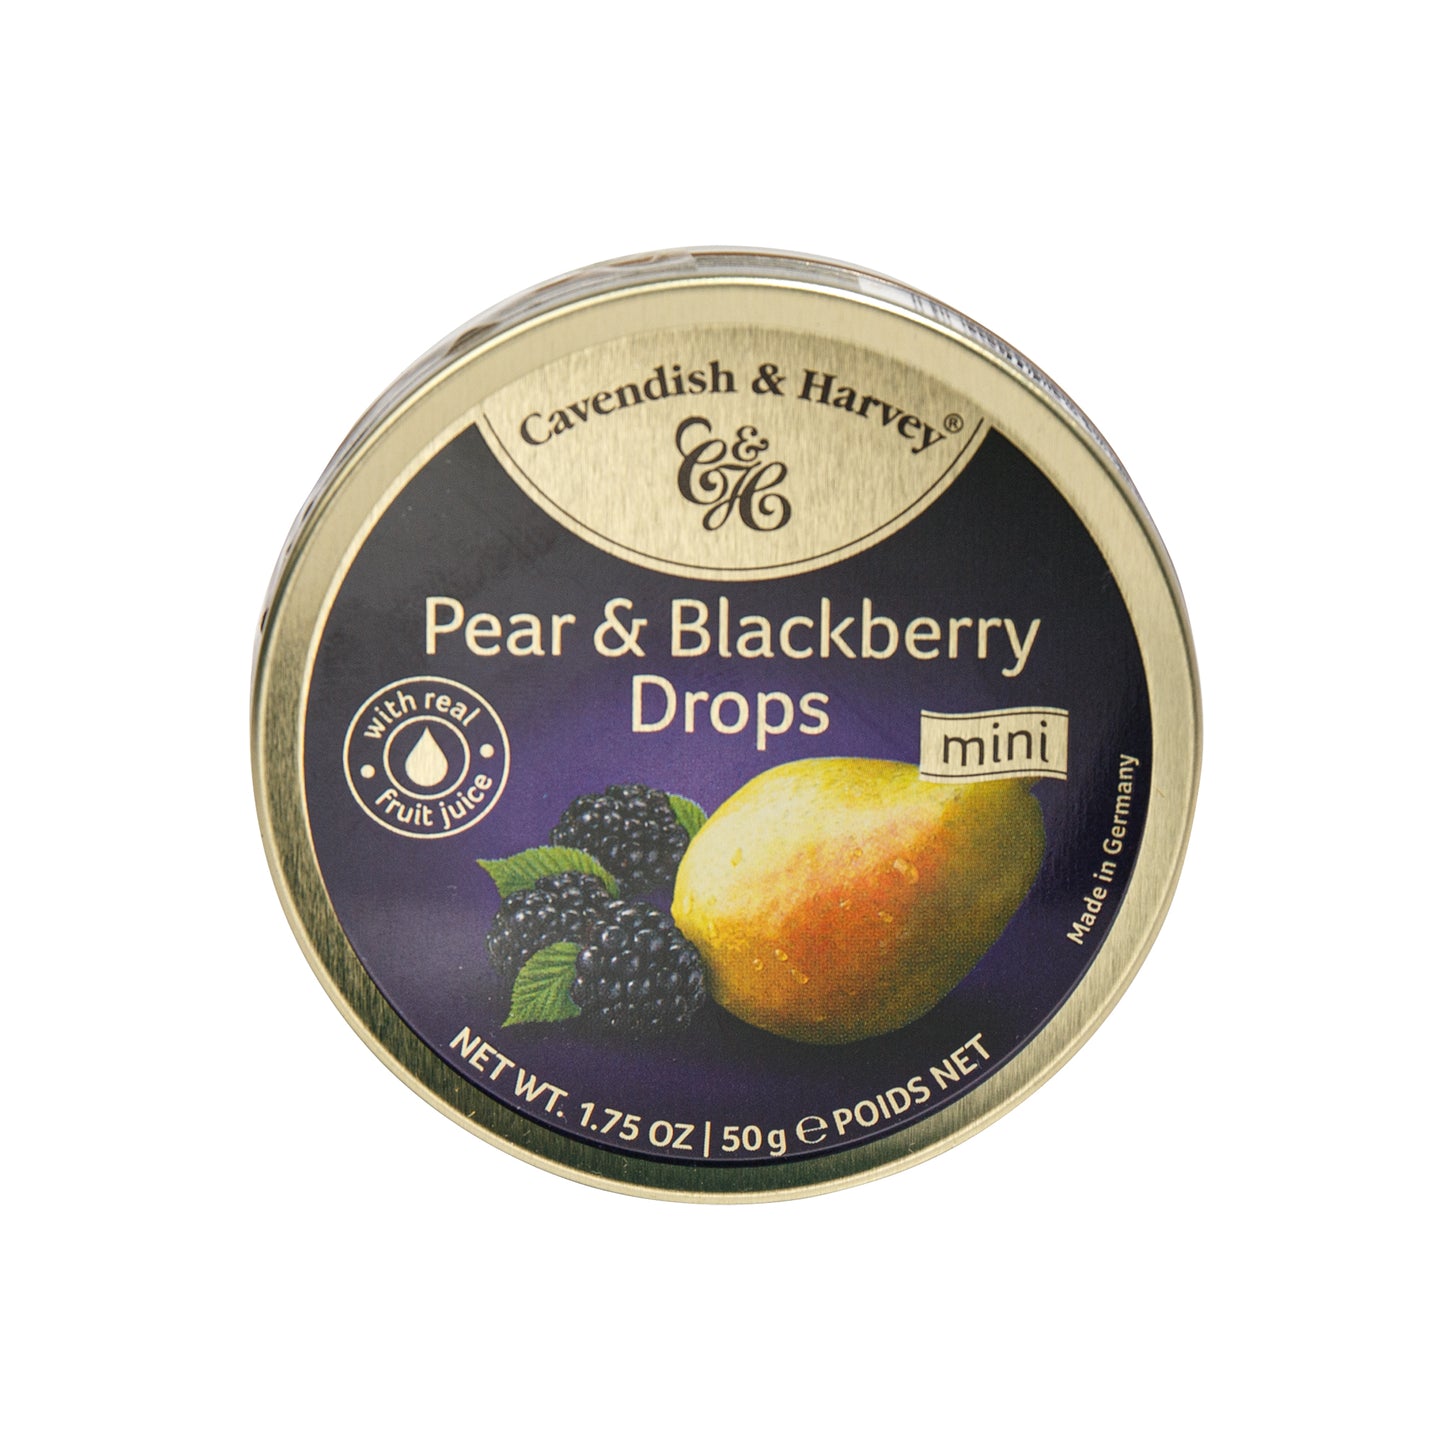 Primary Image of Candy Drops - Pear and Blackberry